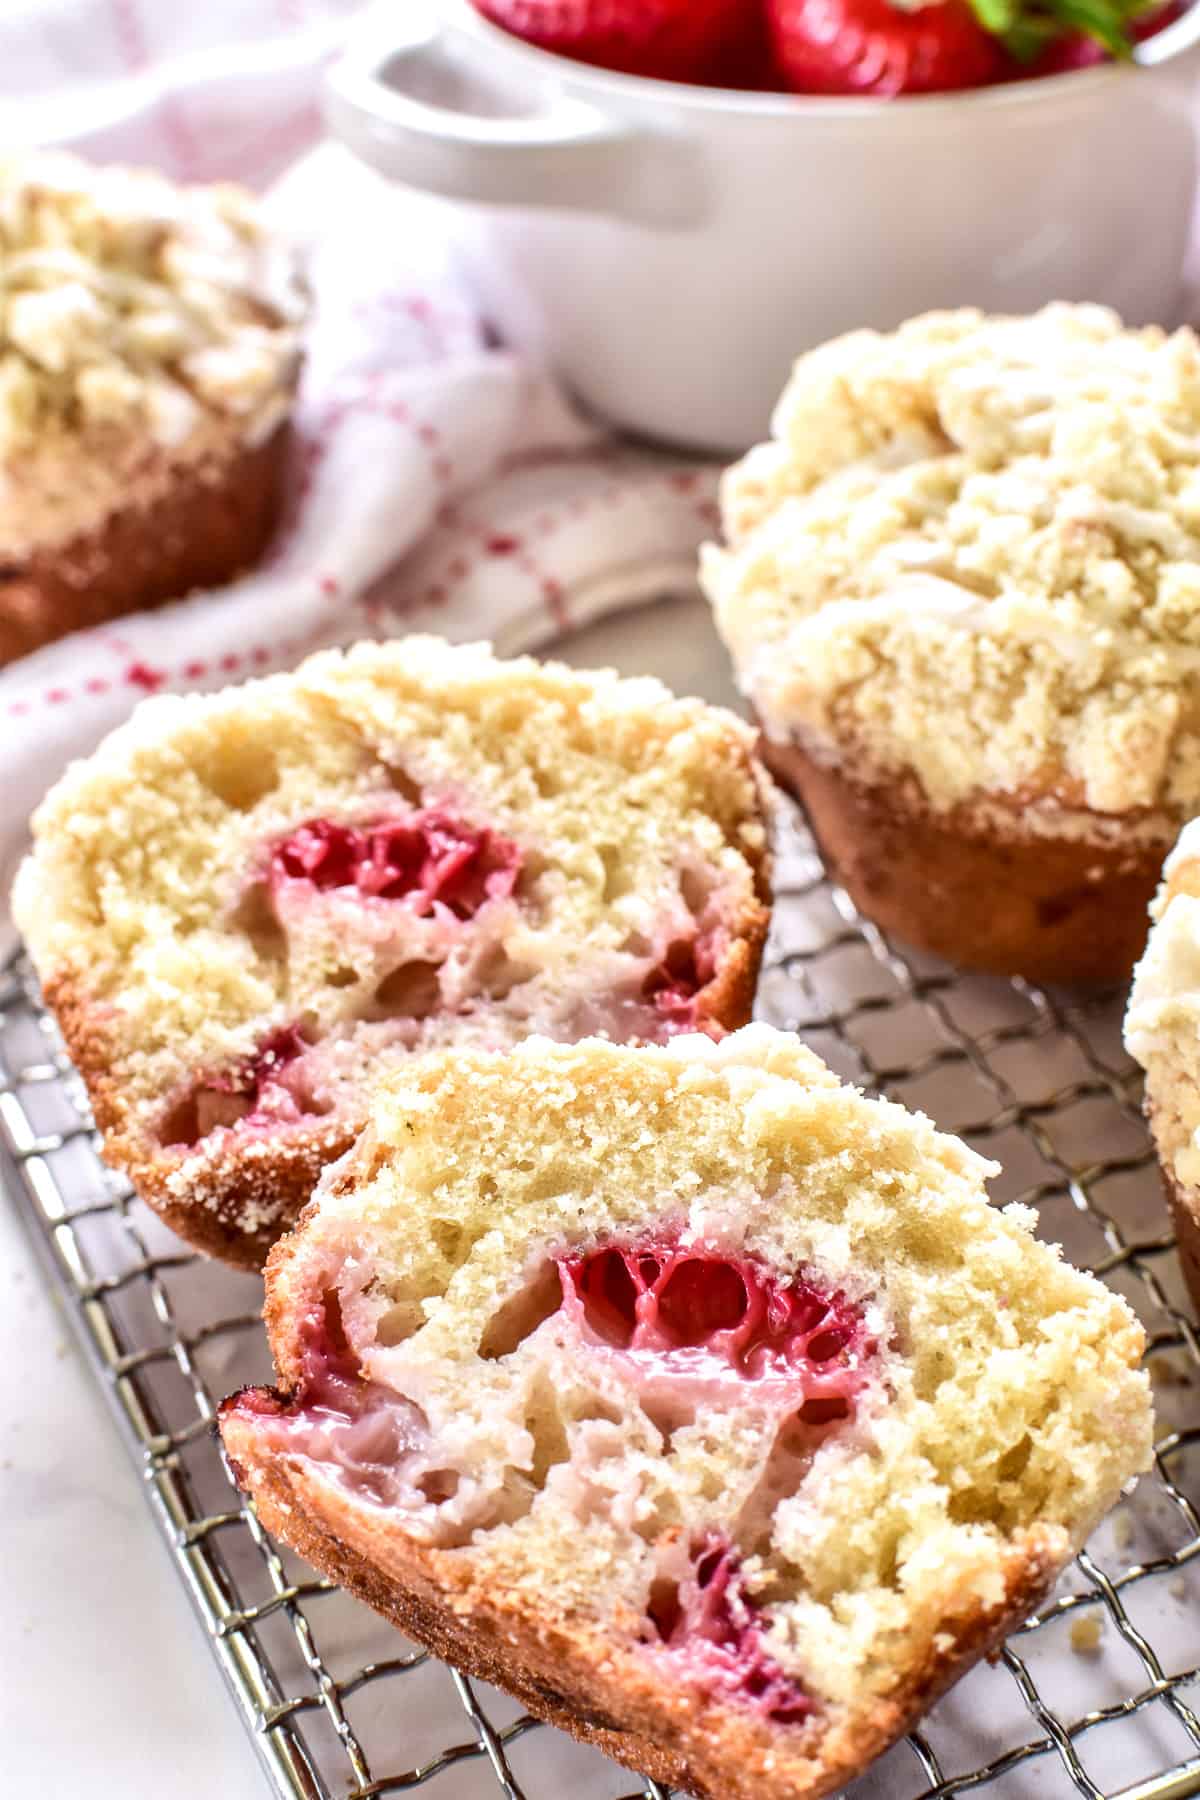 Strawberry Muffin cut in half with strawberries inside